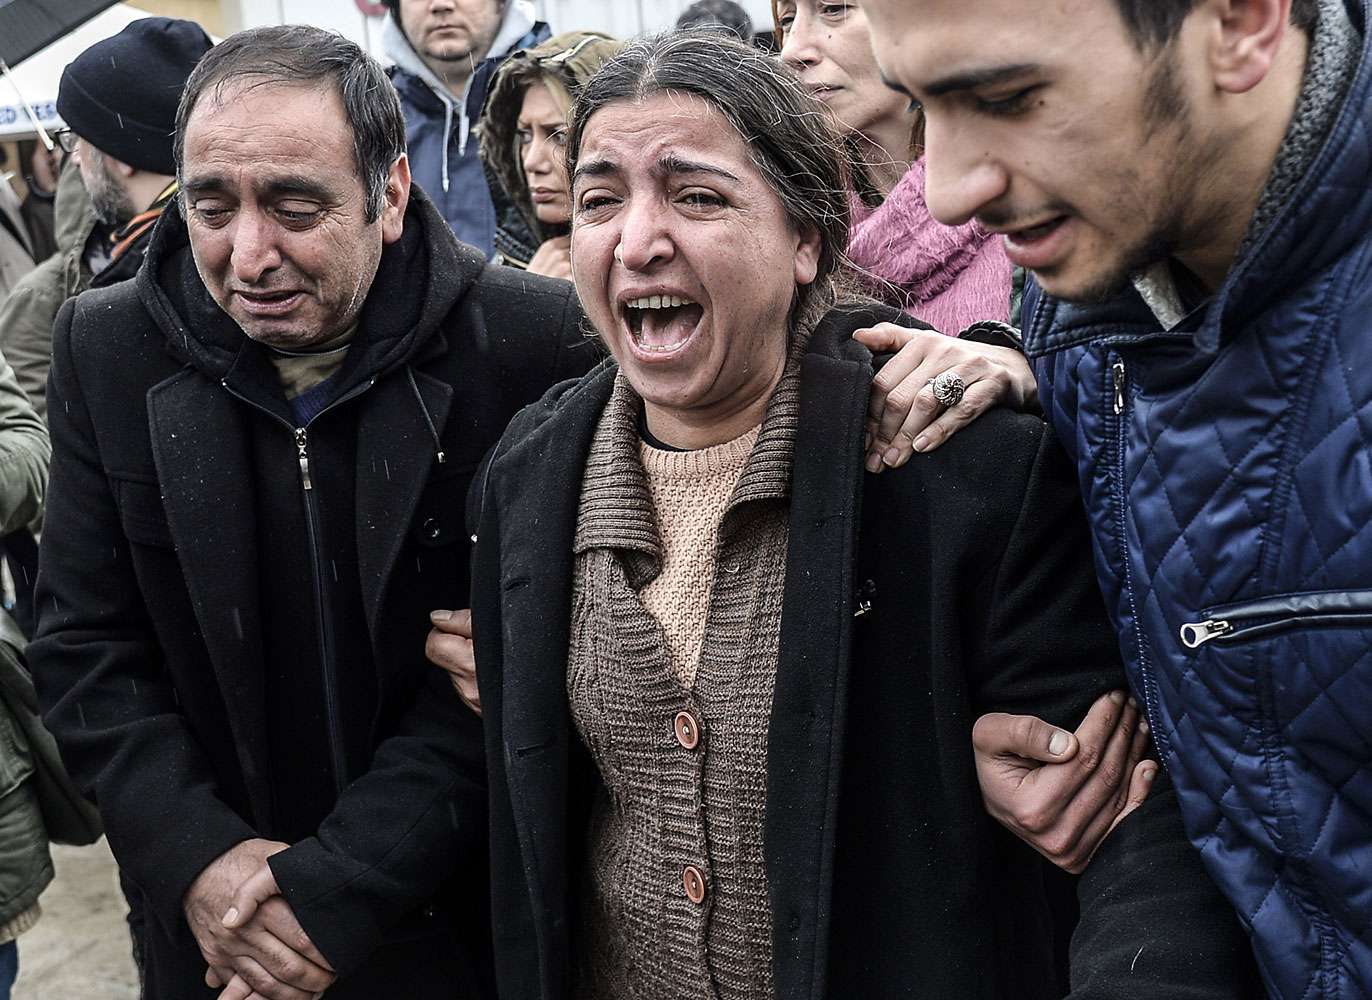 The mother Berkin Elvan cries after her son died at Okmeydani Hospital in Istanbul on March 11, 2014.